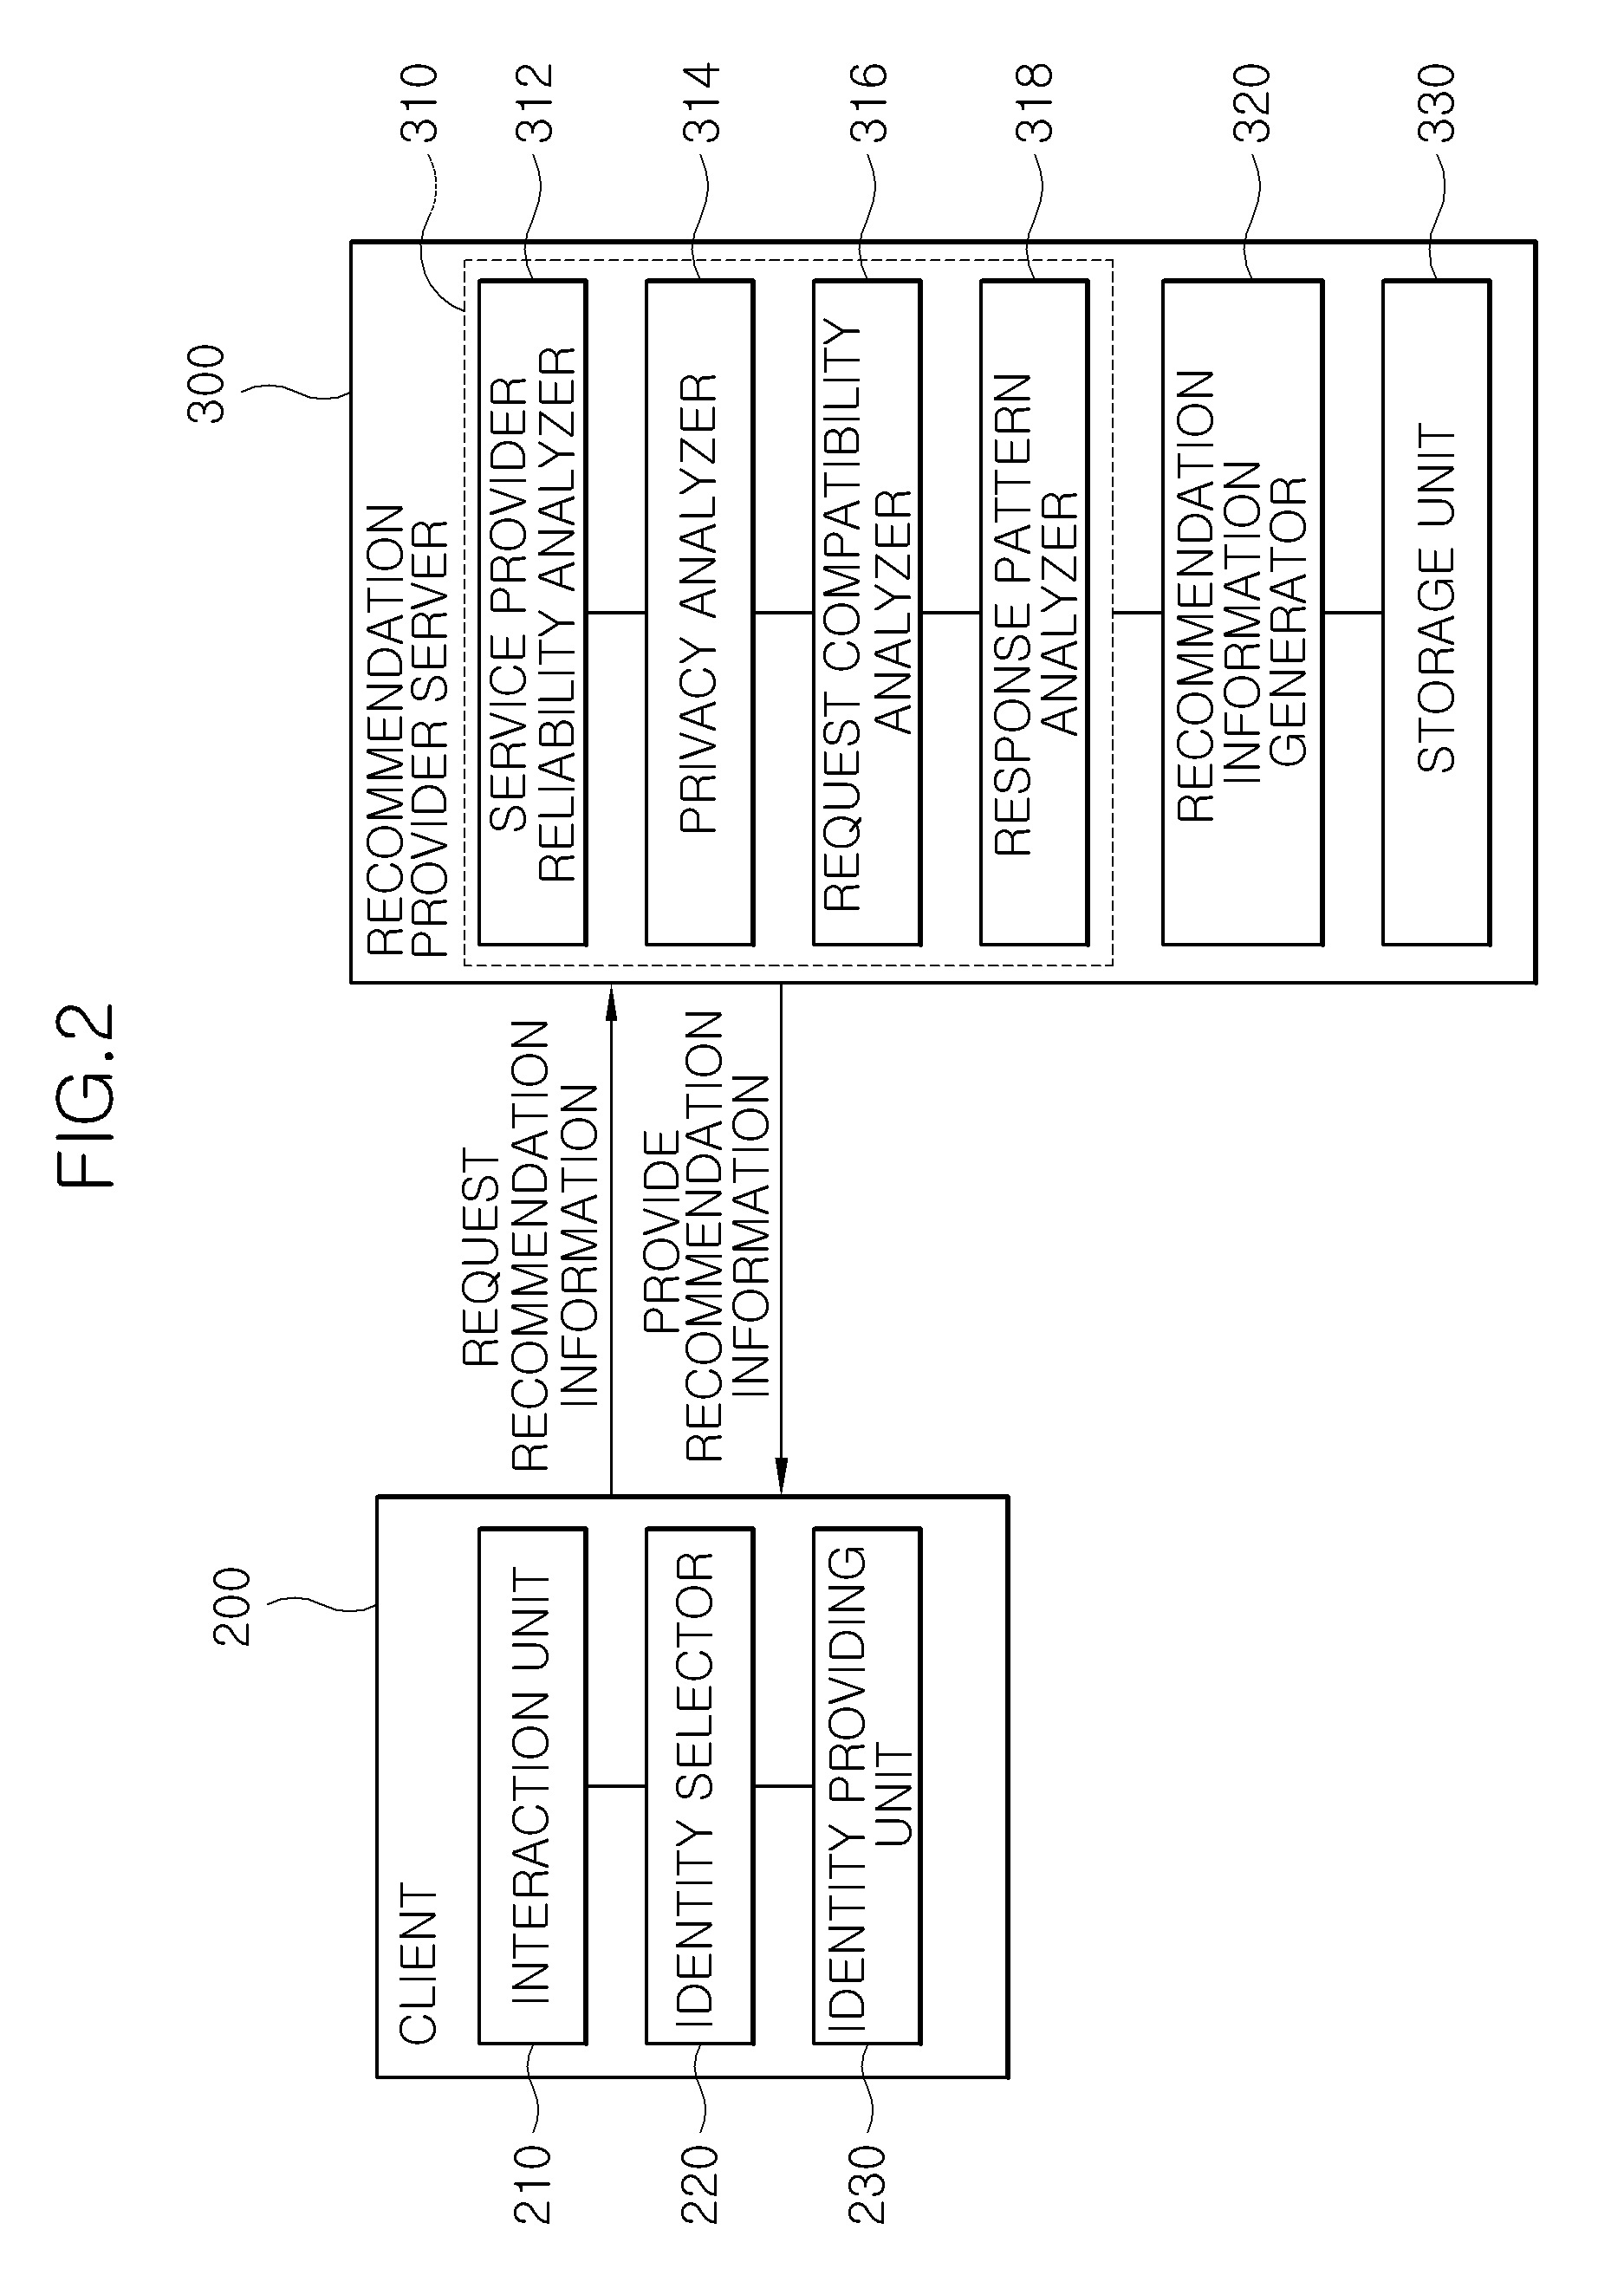 Recommendation system for user's decision about the sharing of private information to other party and method thereof